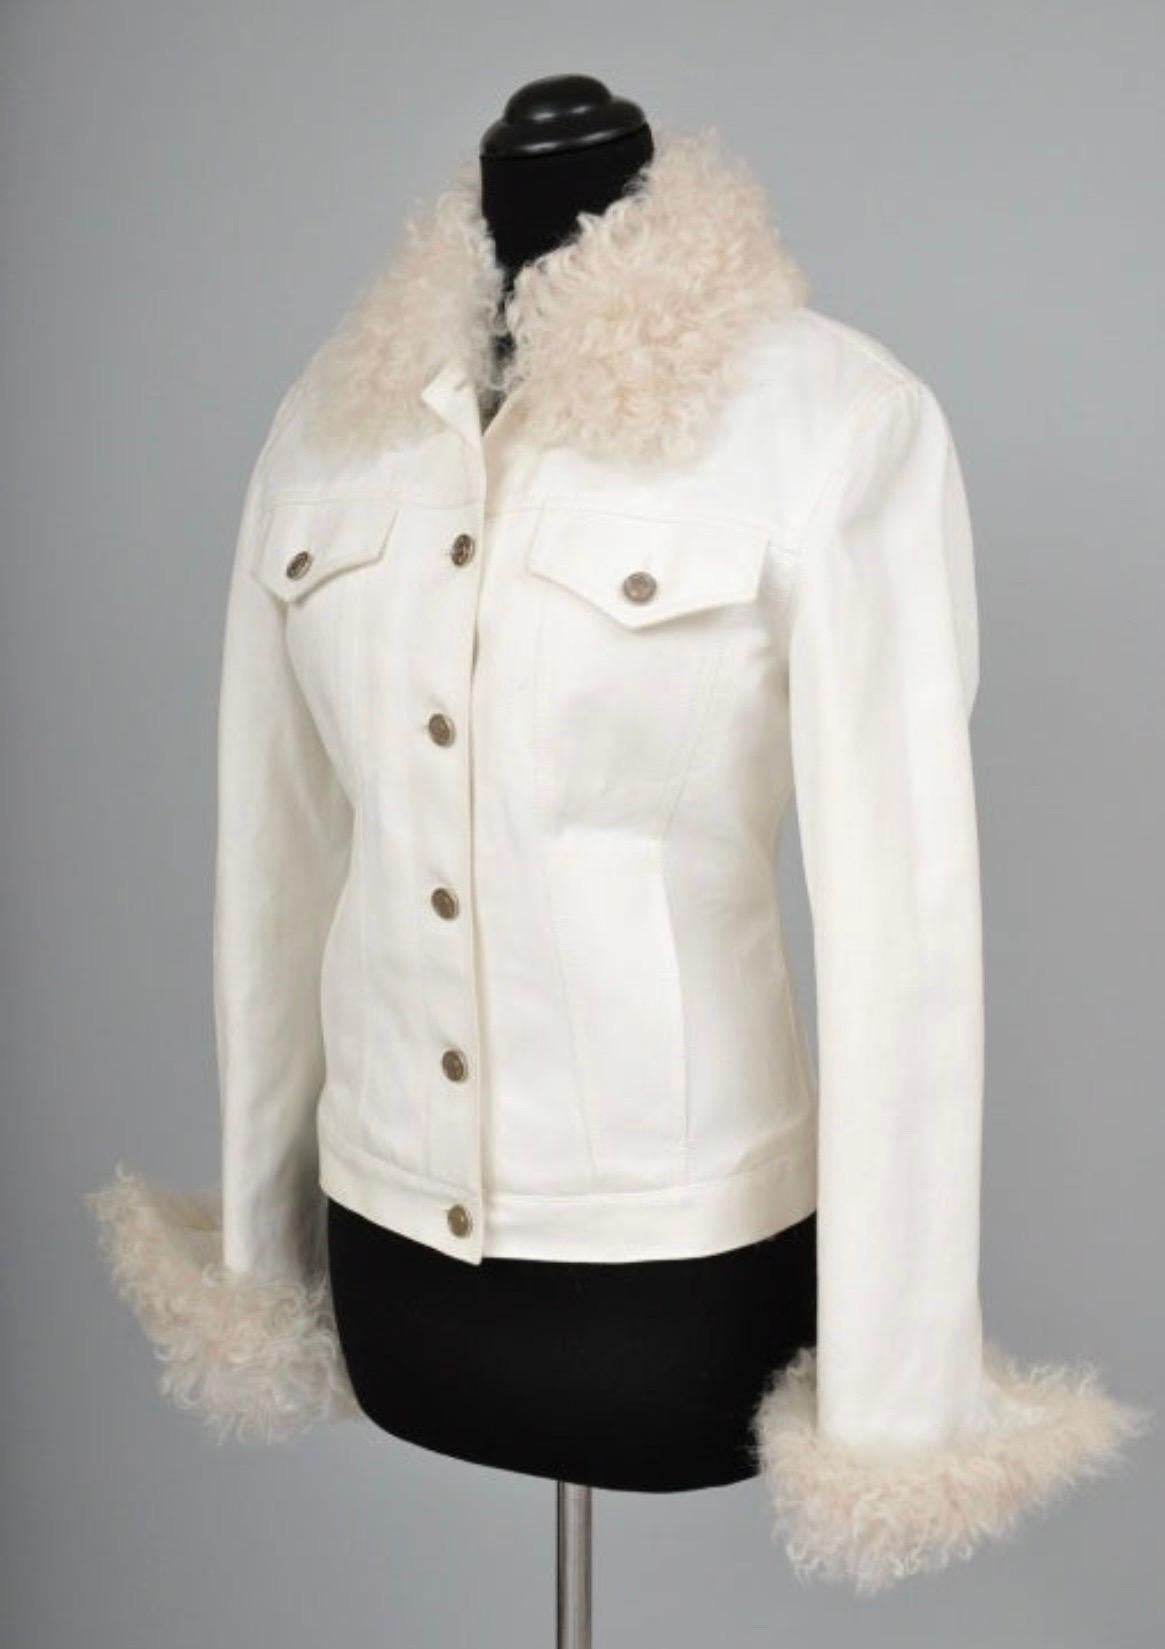 A/W 2001 
Vintage Tom Ford for Gucci 
White Denim and Lamb Fur Jacket
Snow White Denim is lined with Genuine Curly Lamb Fur 
Brand New, with Tags. 
Size: EU - 40, US - 4
